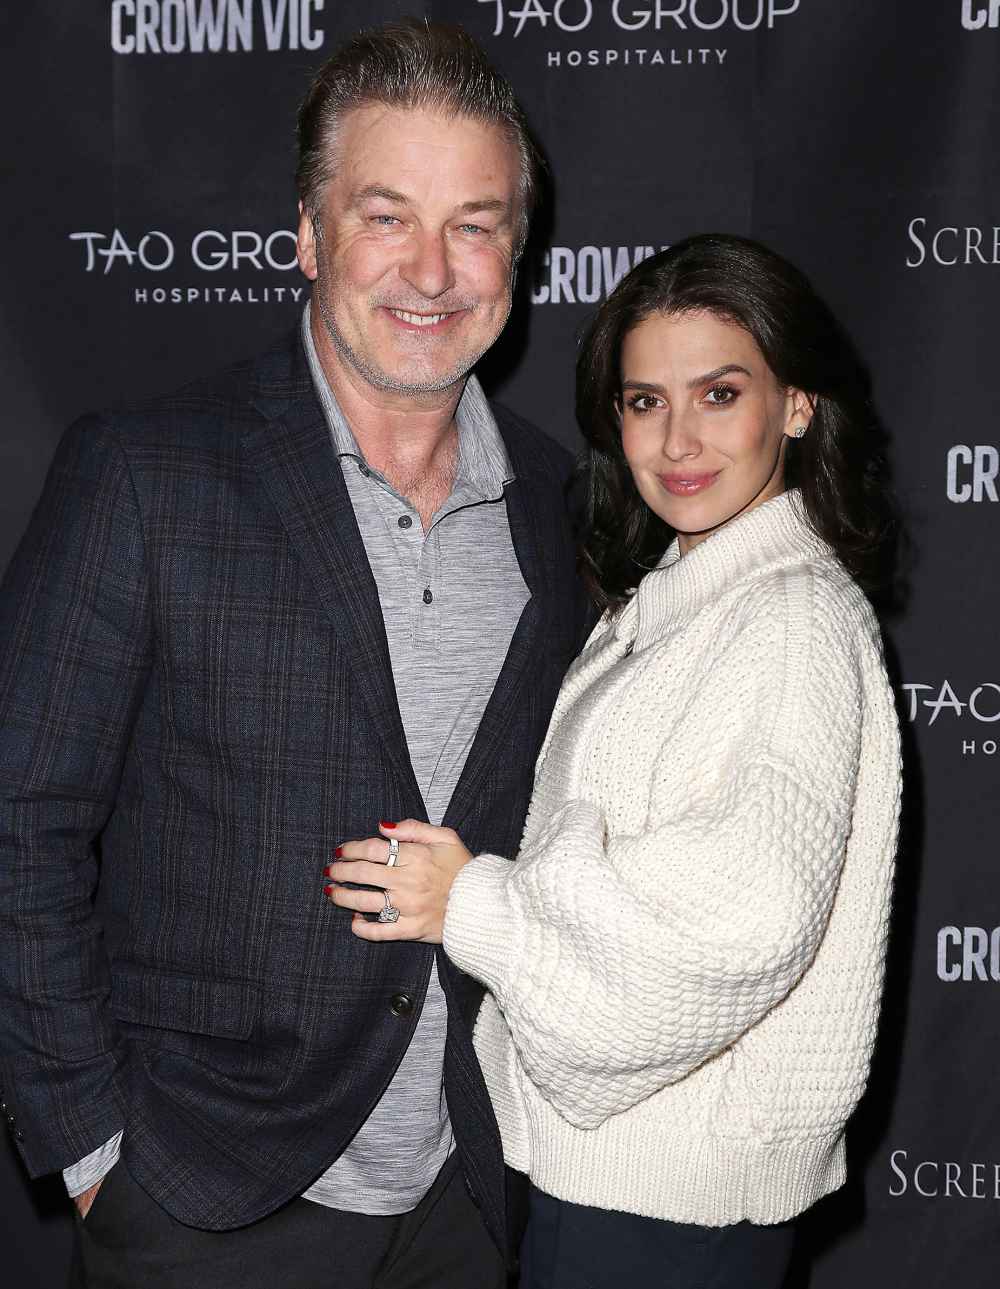 Alec Baldwin’s Favorite Outfit for Wife Hilaria Is ‘Nothing at All’